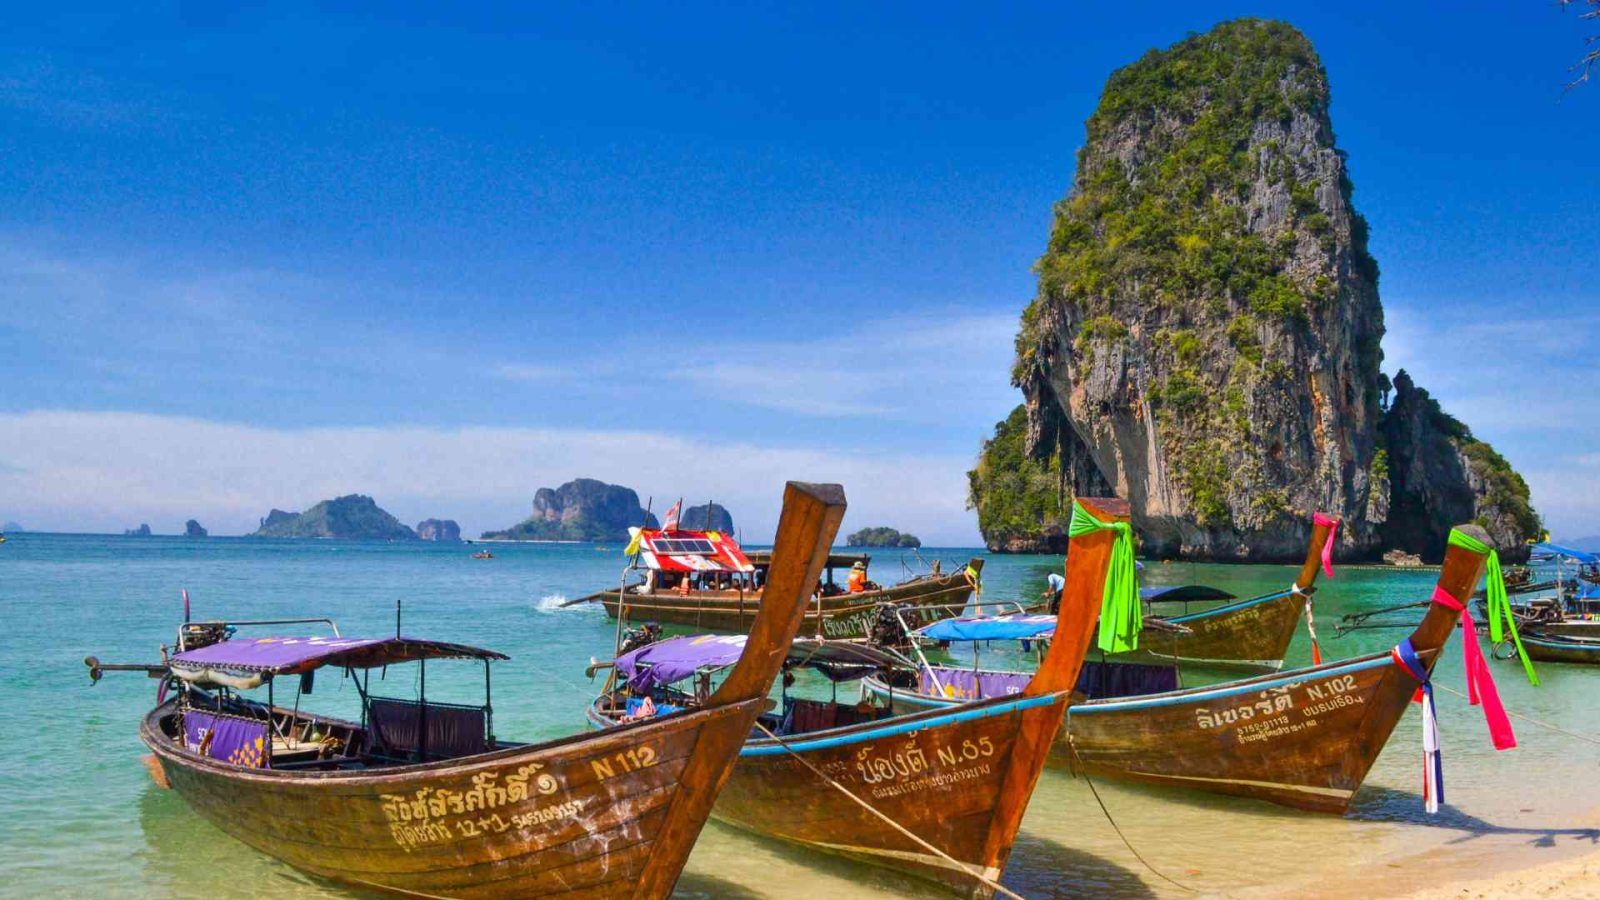 Join Us For A Virtual Tour Of Krabi In Thailand